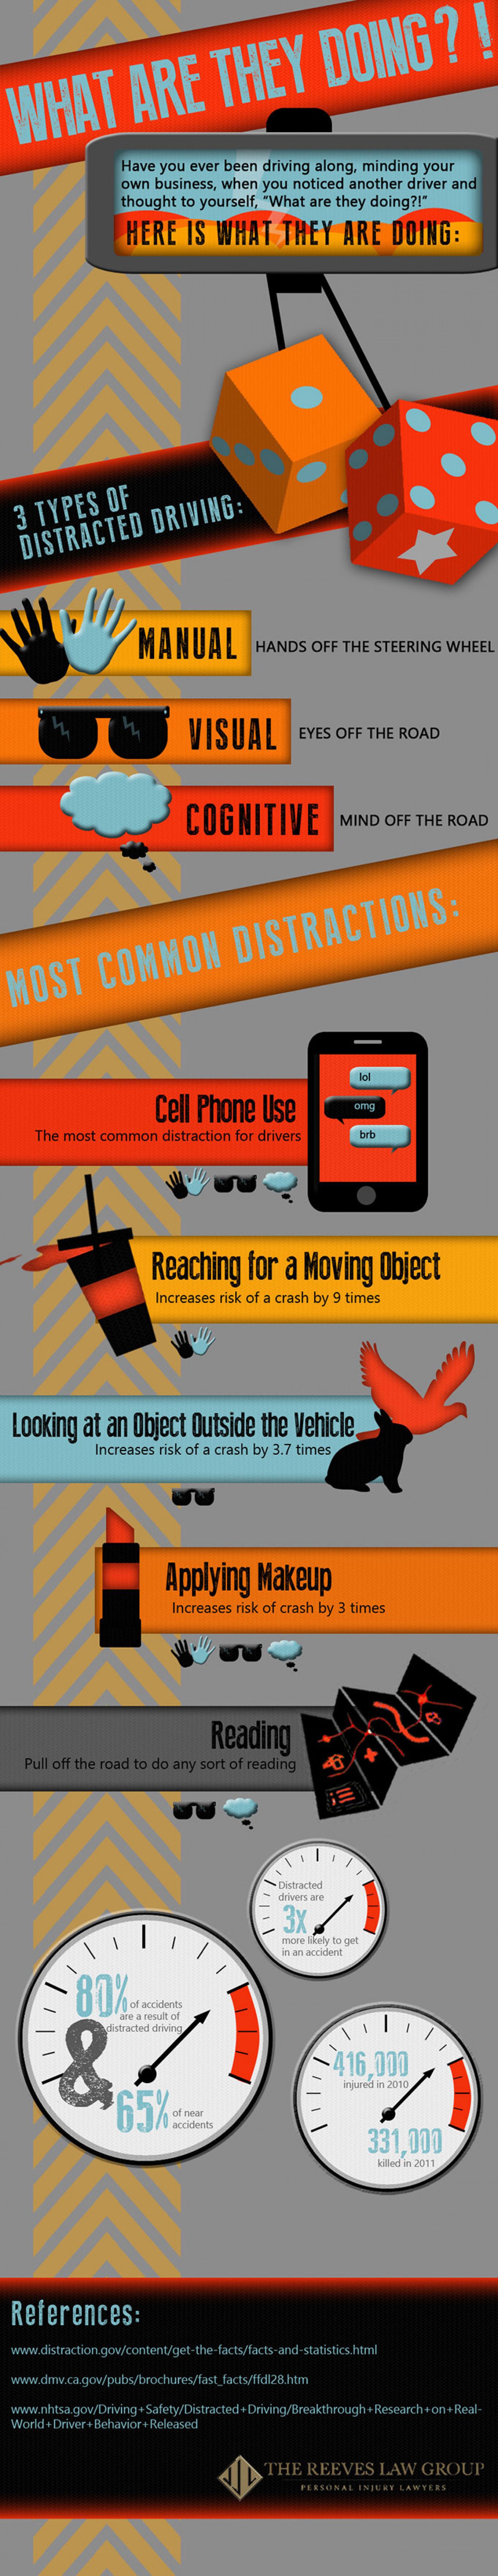 Distracted Driving: What are they doing? Infographic